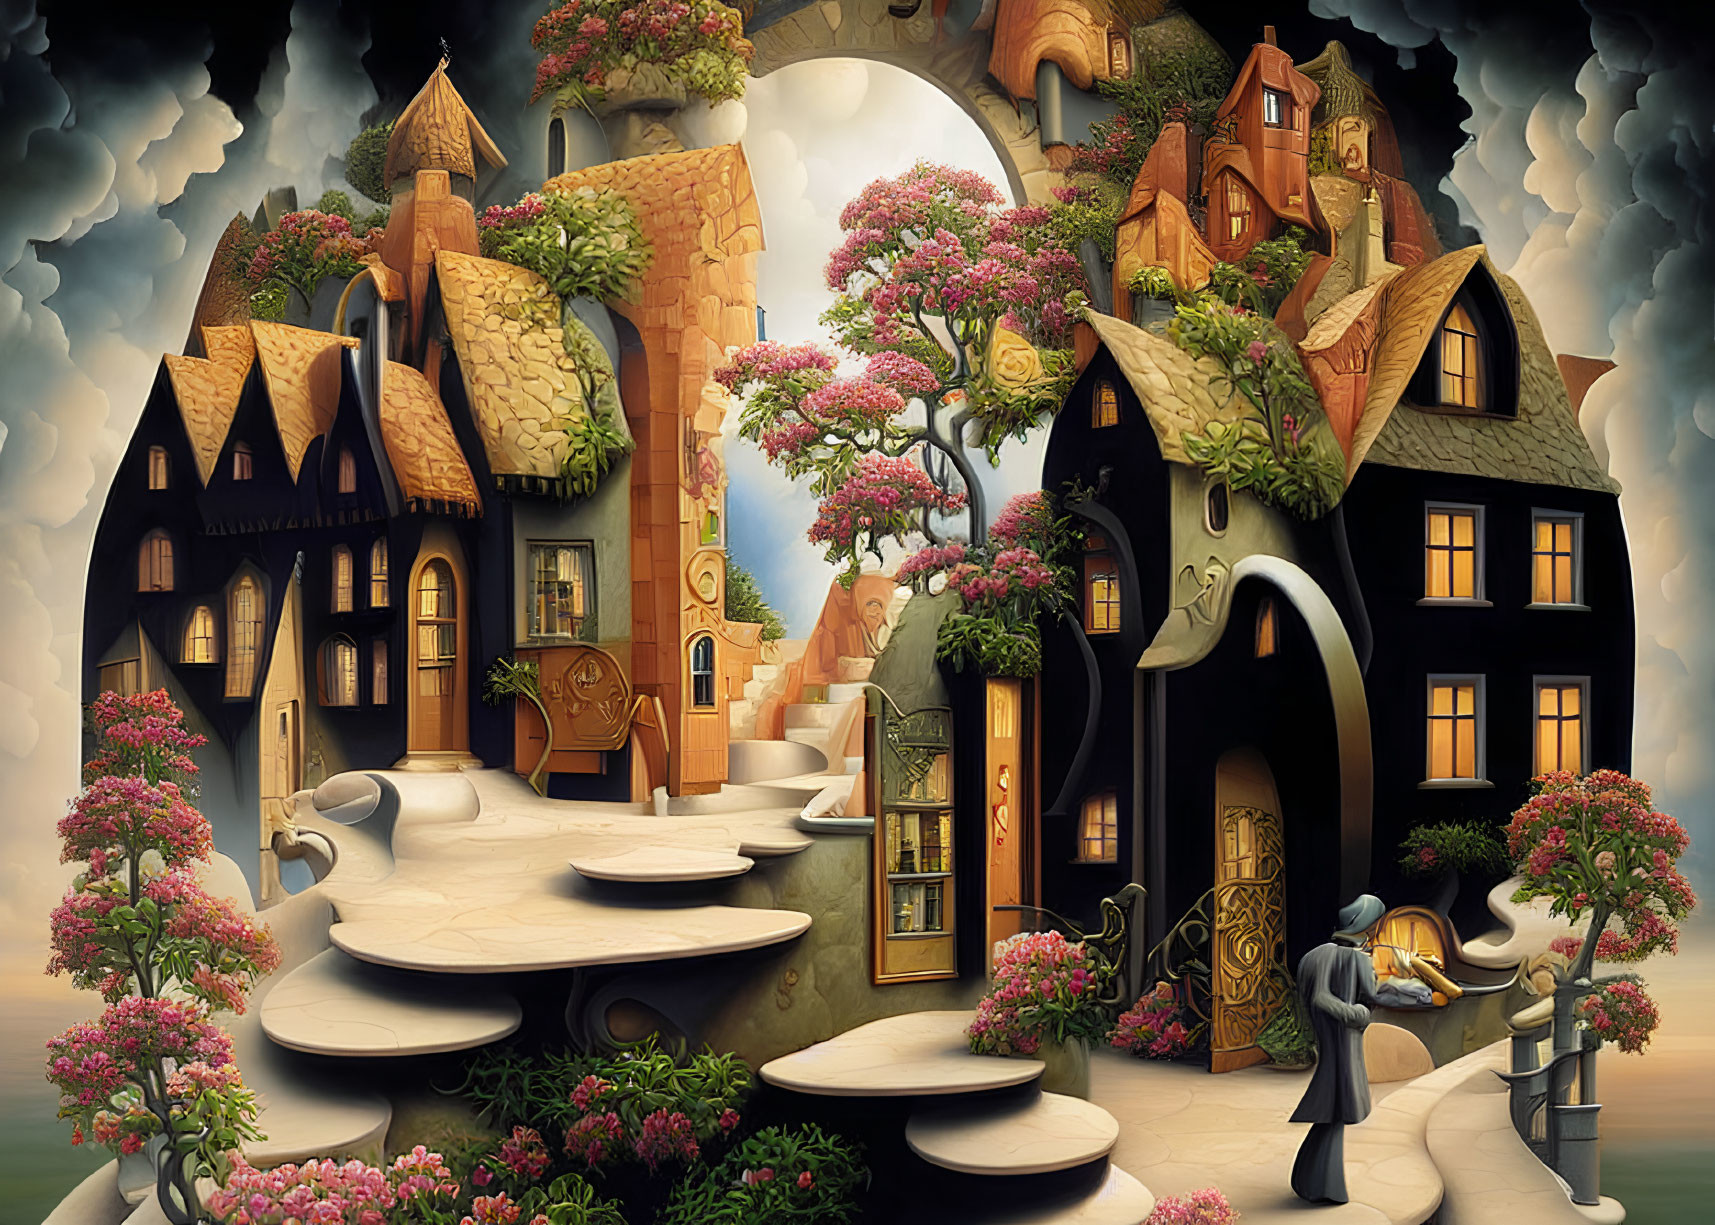 Curved, whimsical fairytale village with blooming trees and character in cloak